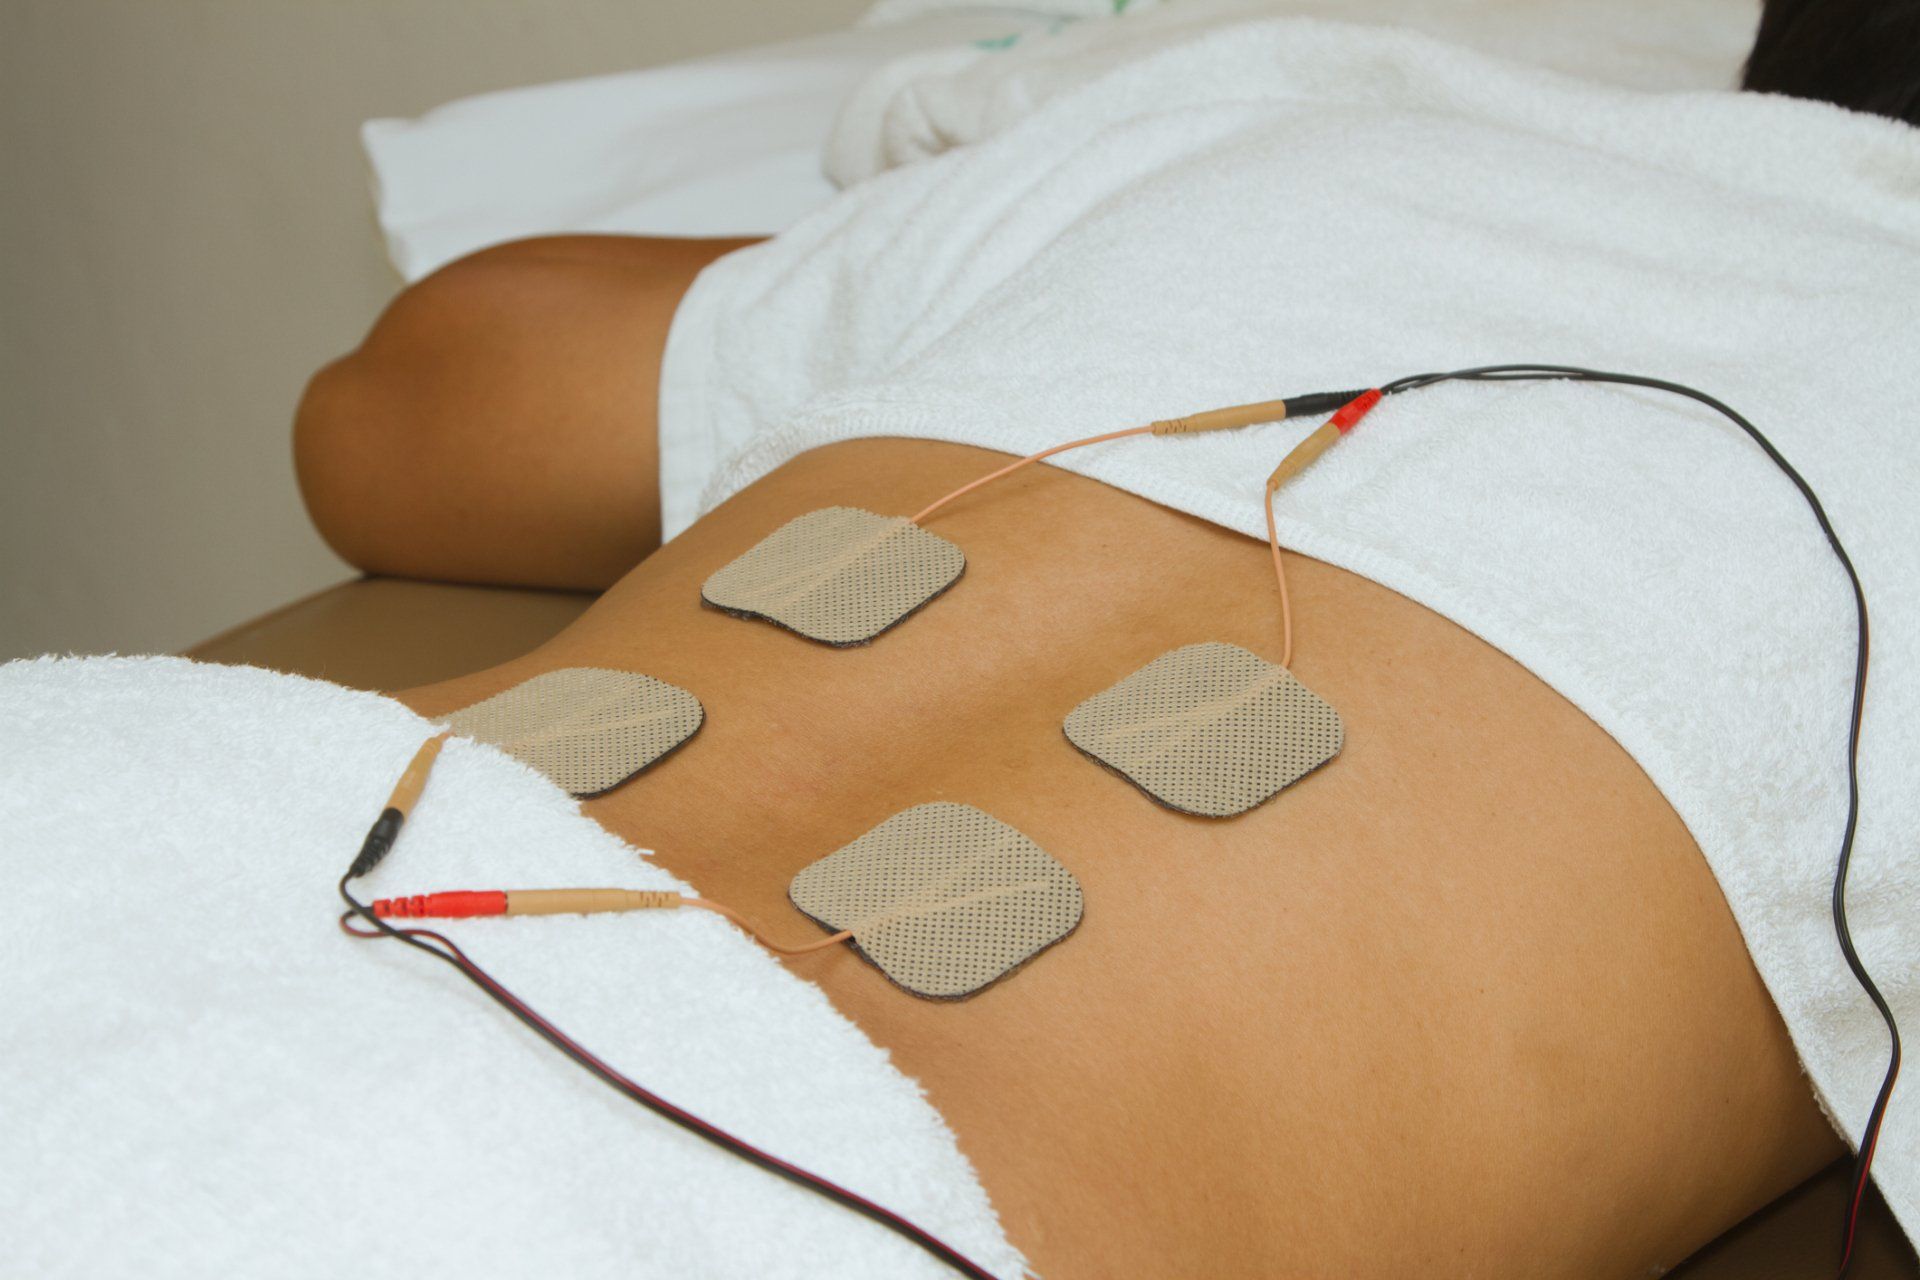 Electrical stimulation therapy - Fresno, CA - Pain Clinics of Central California